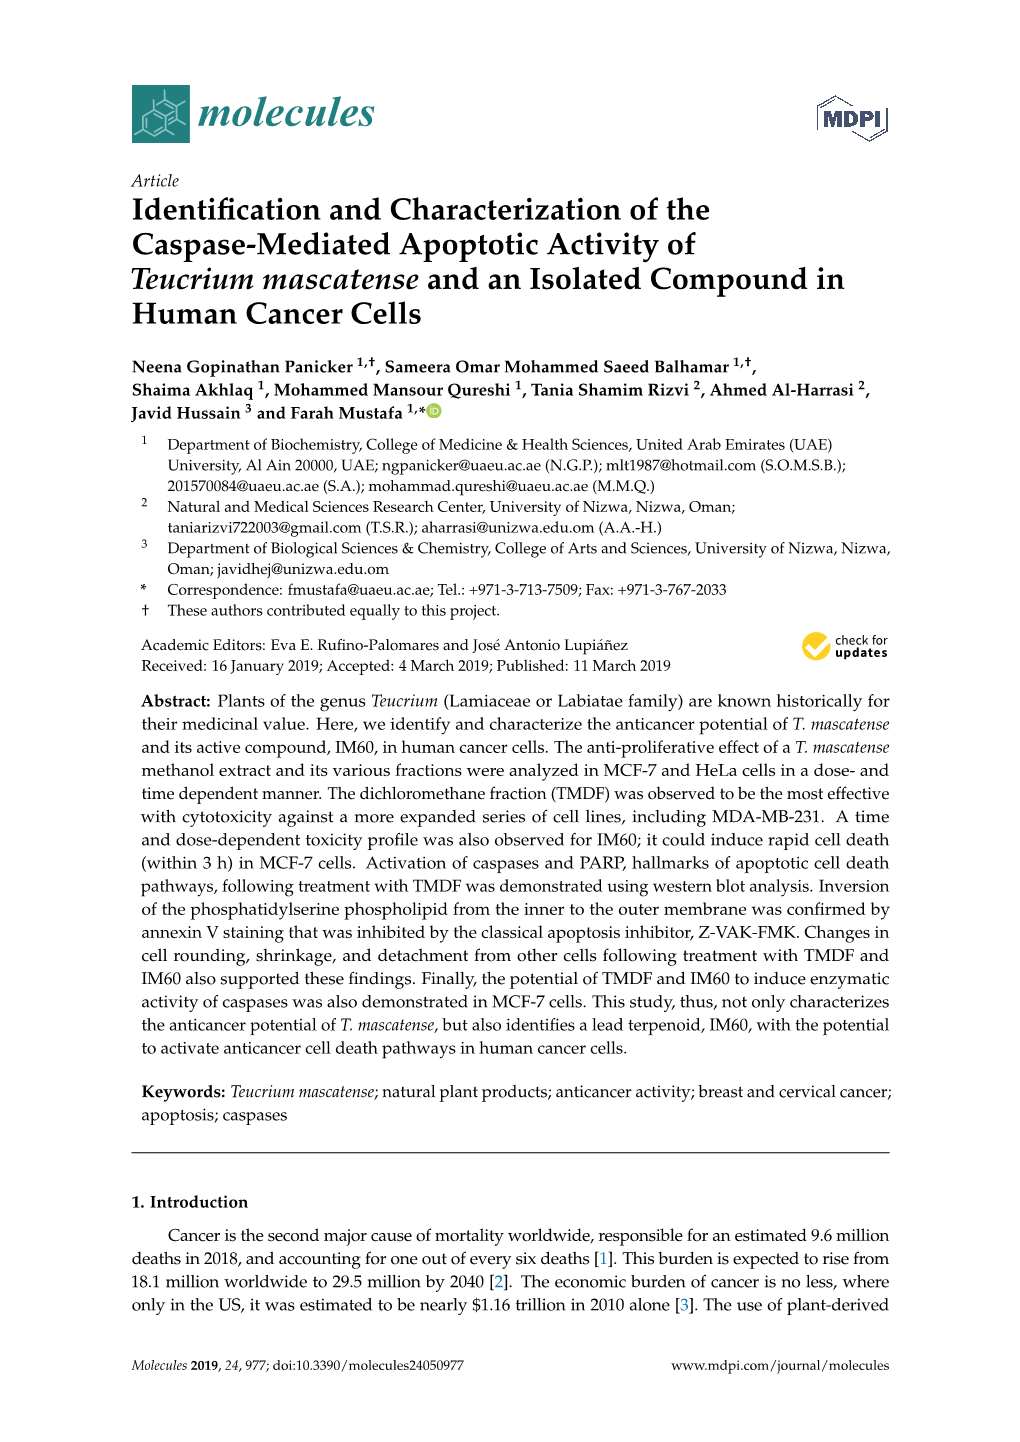 Identification and Characterization of the Caspase-Mediated Apoptotic Activity of Teucrium Mascatense and an Isolated Compound in Human Cancer Cells